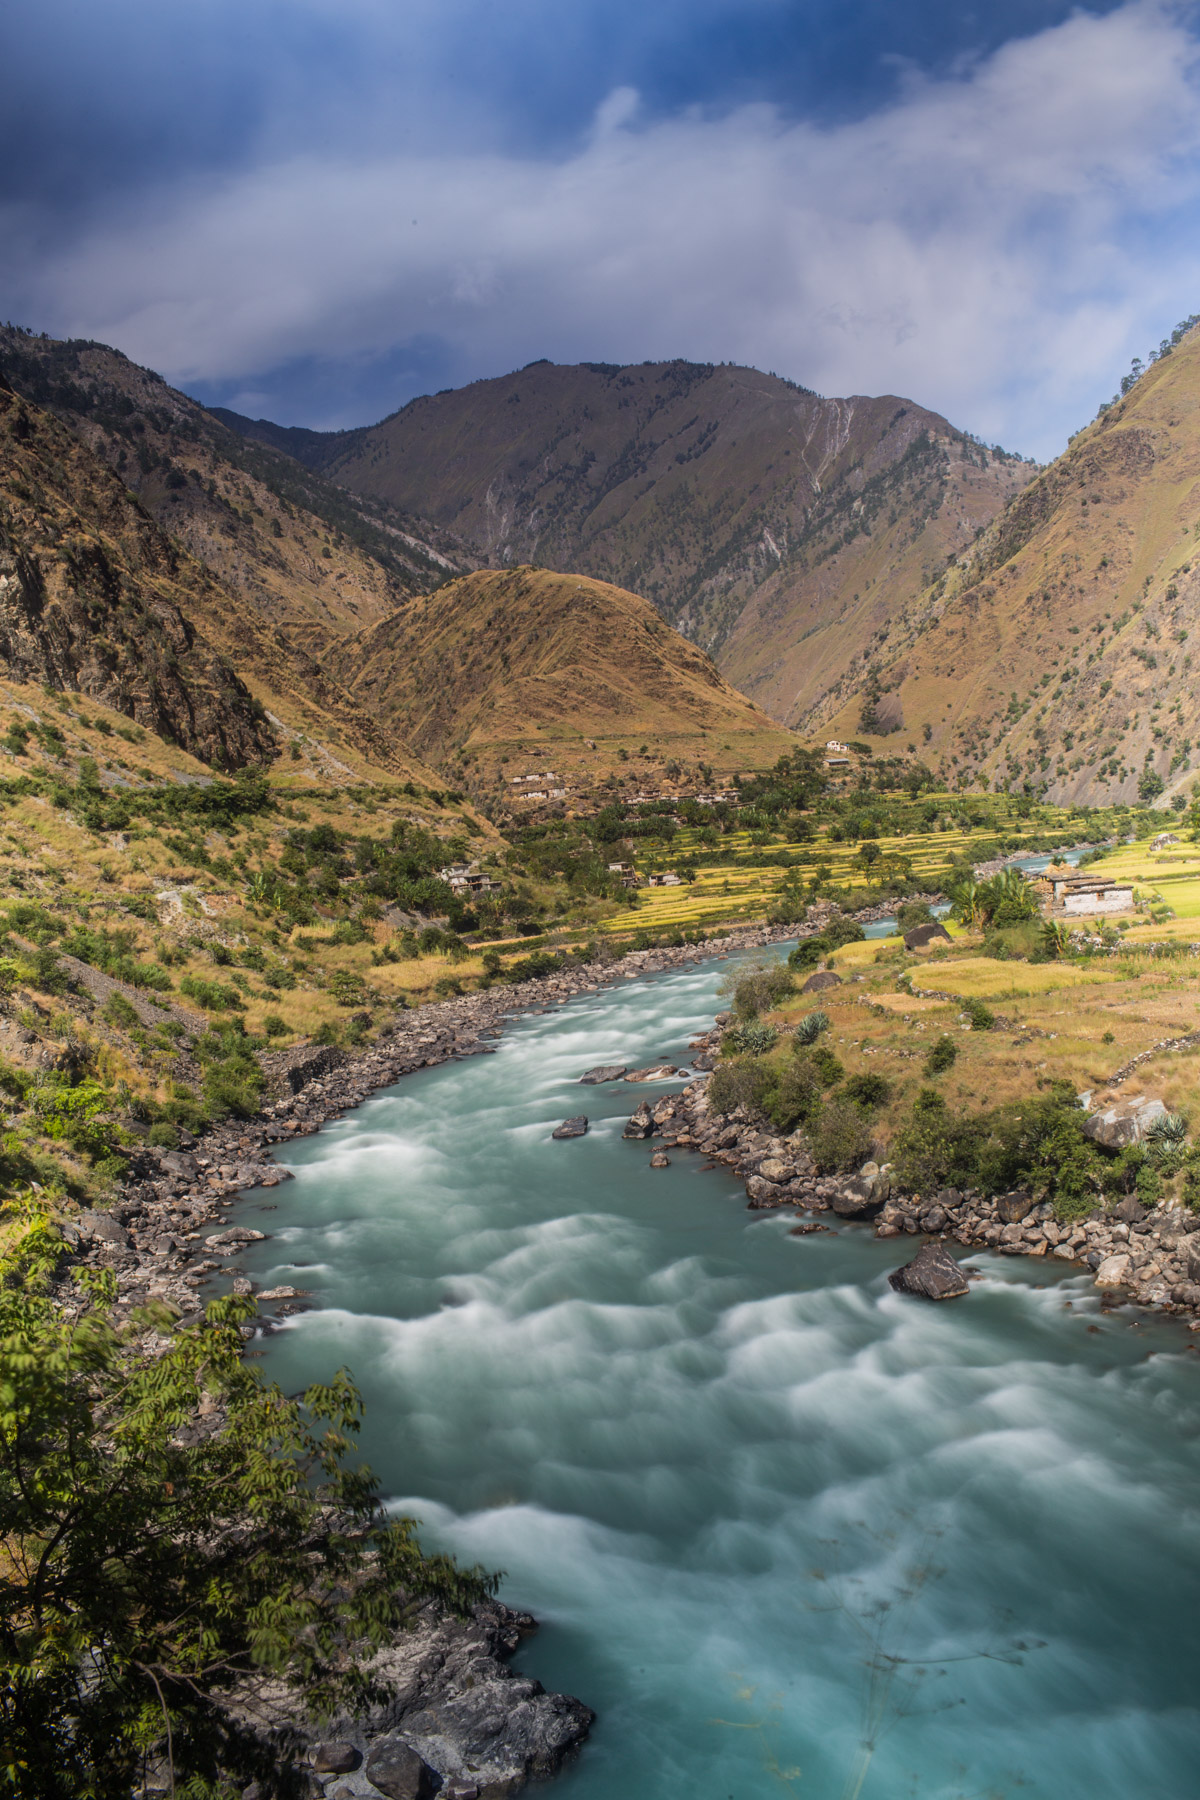 South Asian countries join forces to destroy the last free-flowing river of Nepal